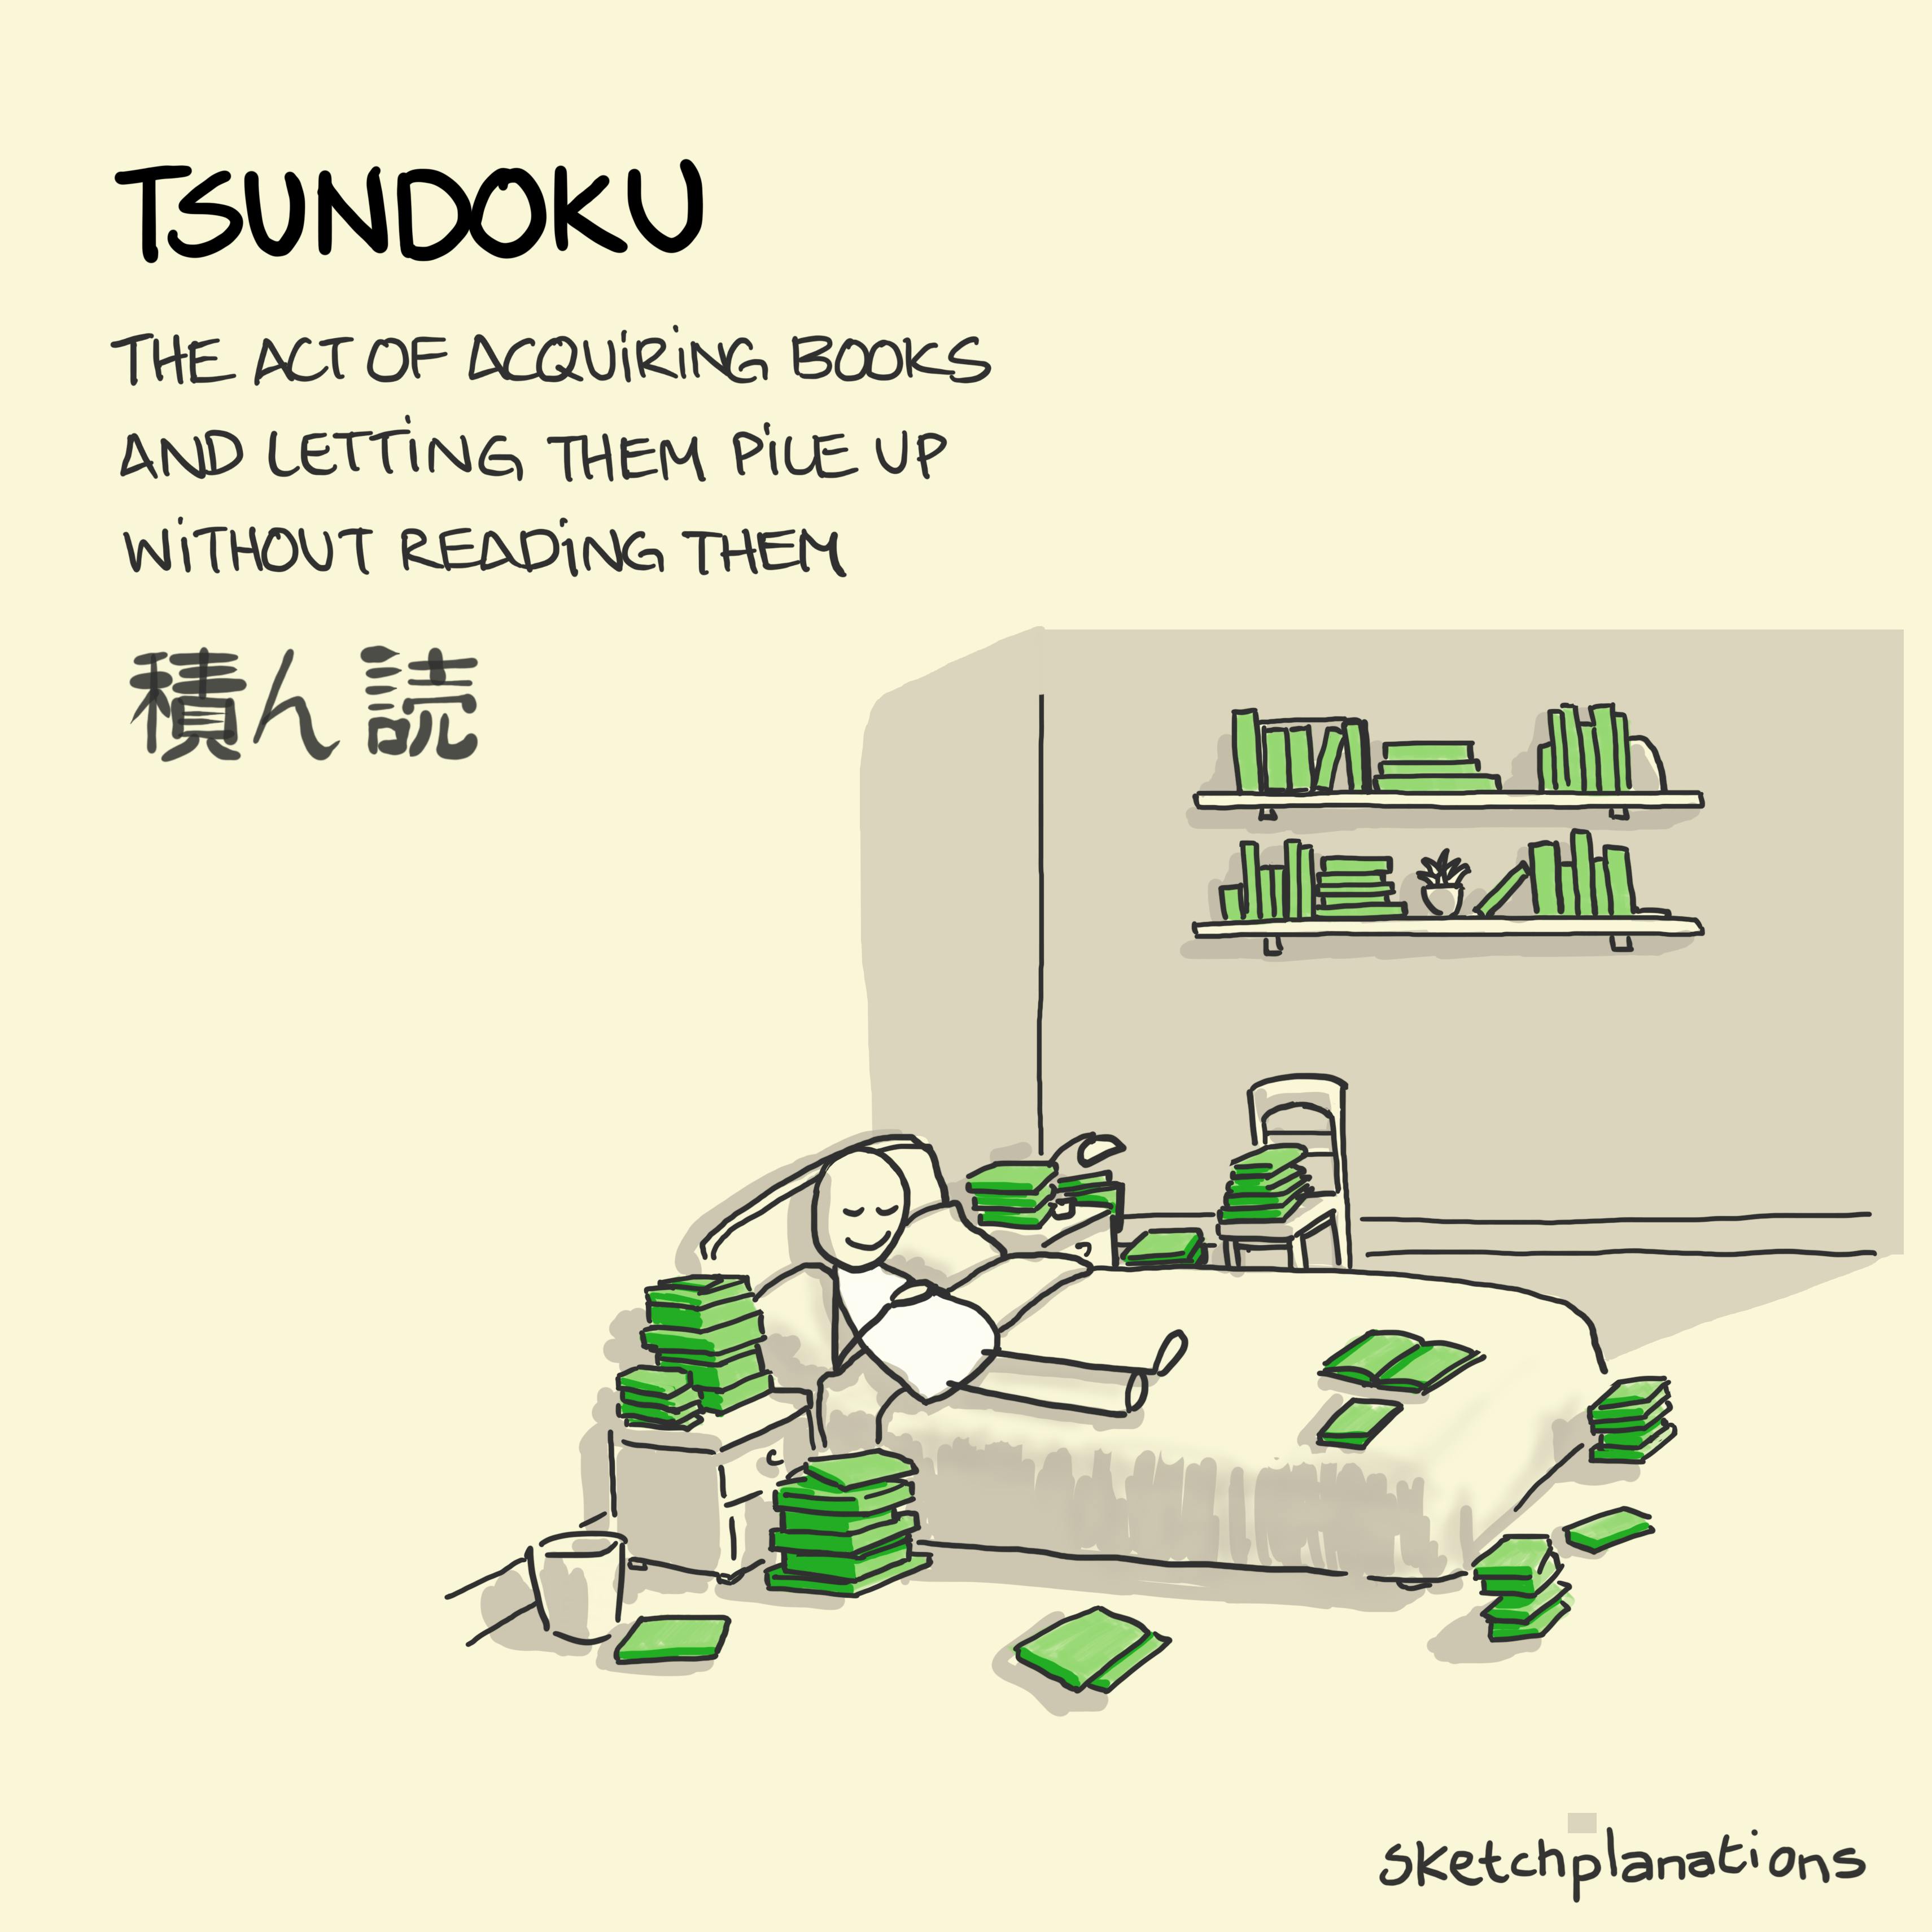 Tsundoku illustration: A person snoozes happily on their bed surrounded by books, books and books